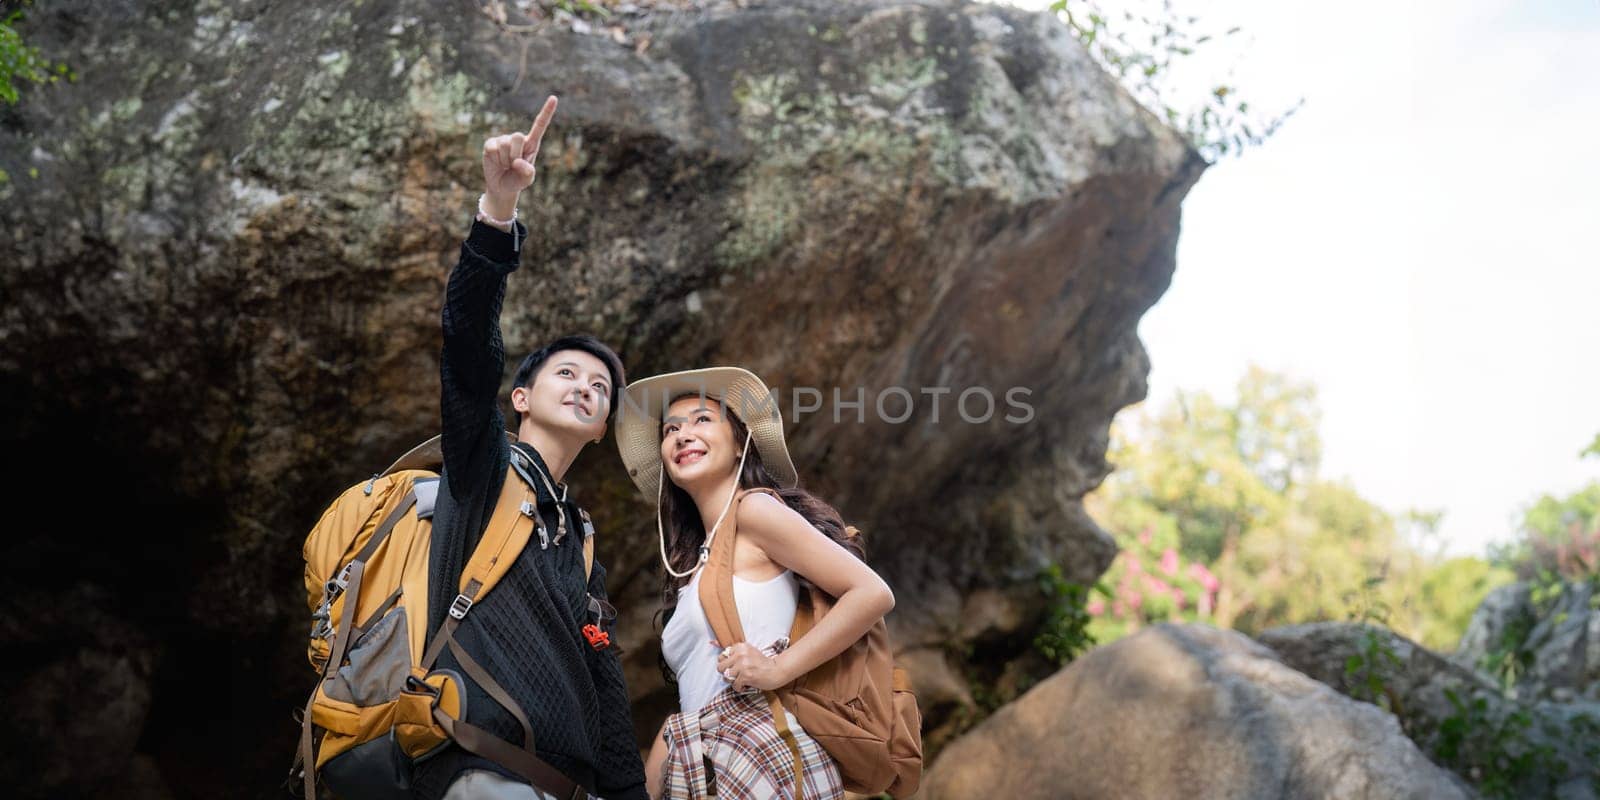 Lovely couple lesbian woman with backpack hiking in nature. Loving LGBT romantic moment in mountains by nateemee